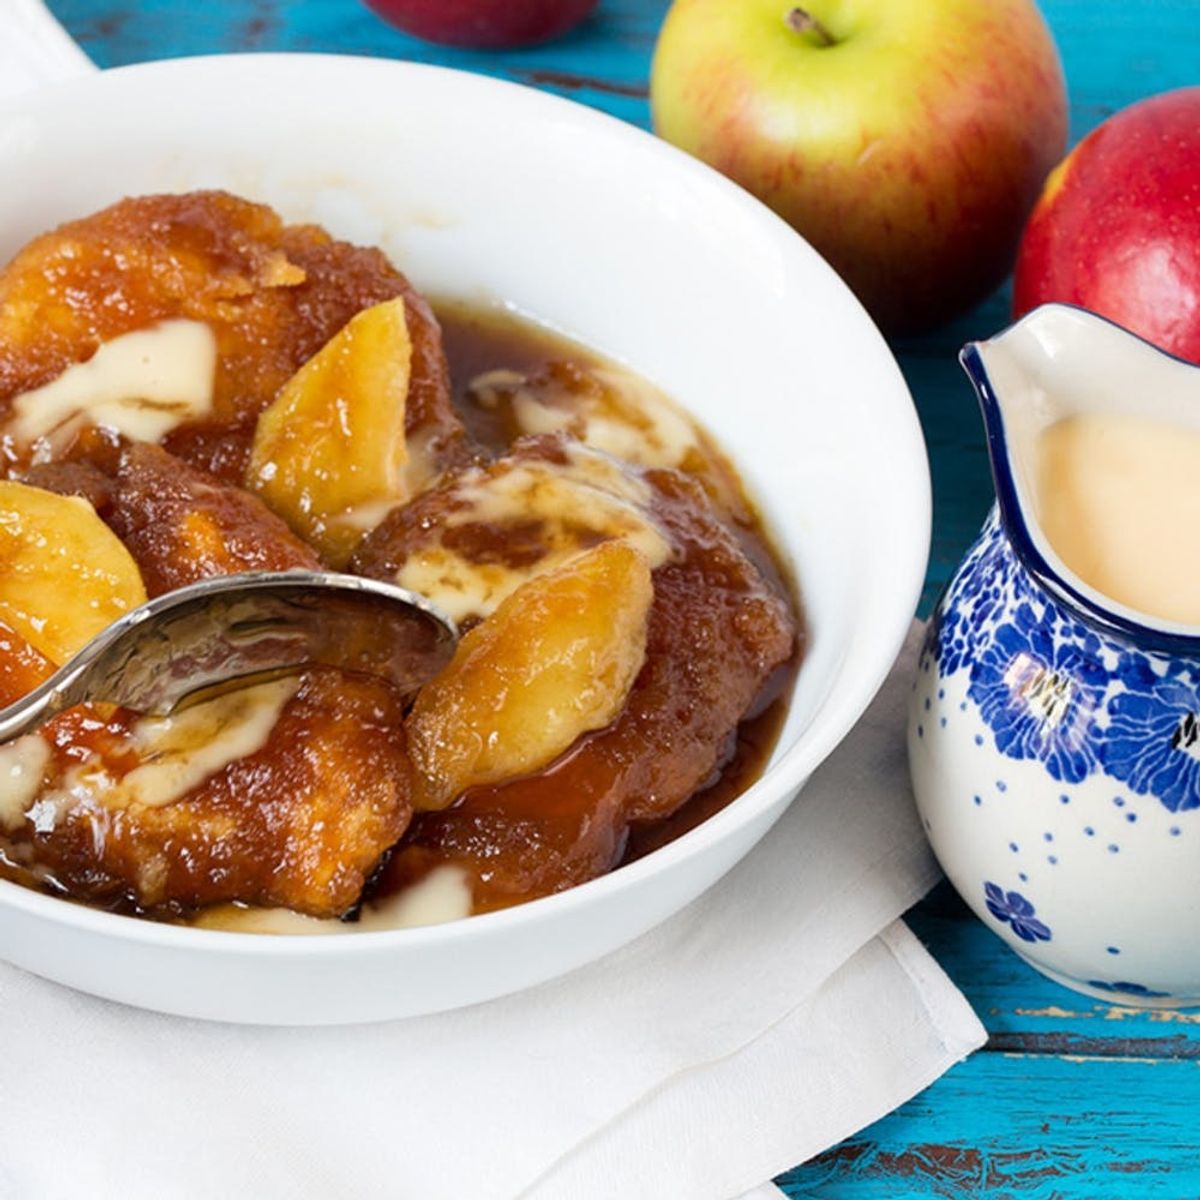 How to Make Sweet Apple Dumplings for Your Next Book Club Night